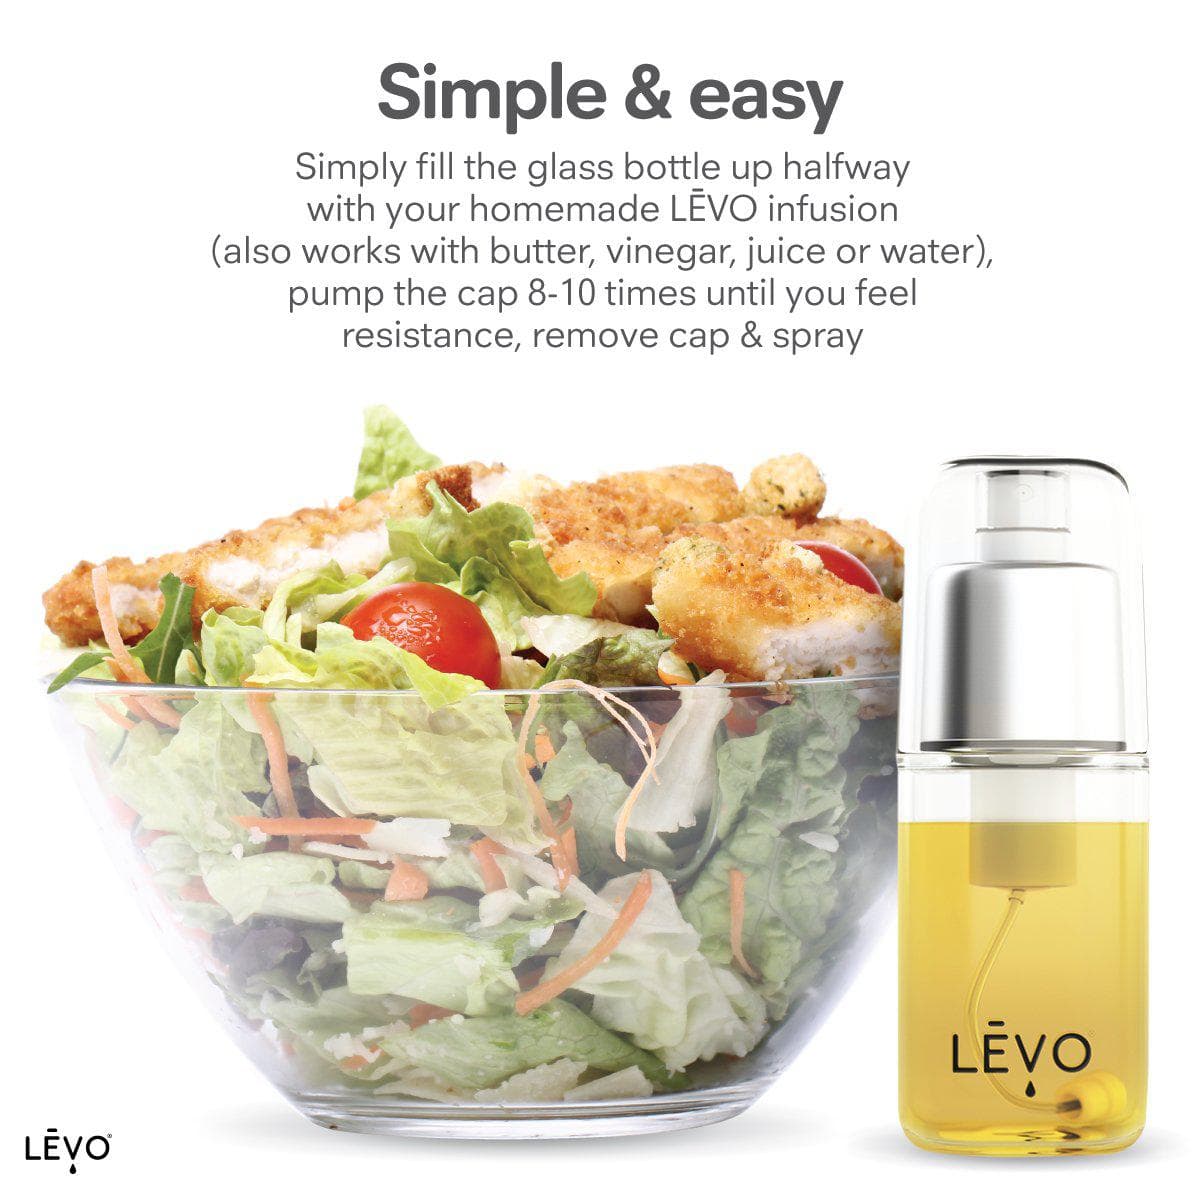 LEVO oil infusion sprayer is simple and easy to use with butter, vinegar, juice, or water. Pump the cap 8-10 times until you feel resistance, remove cap, and spray.